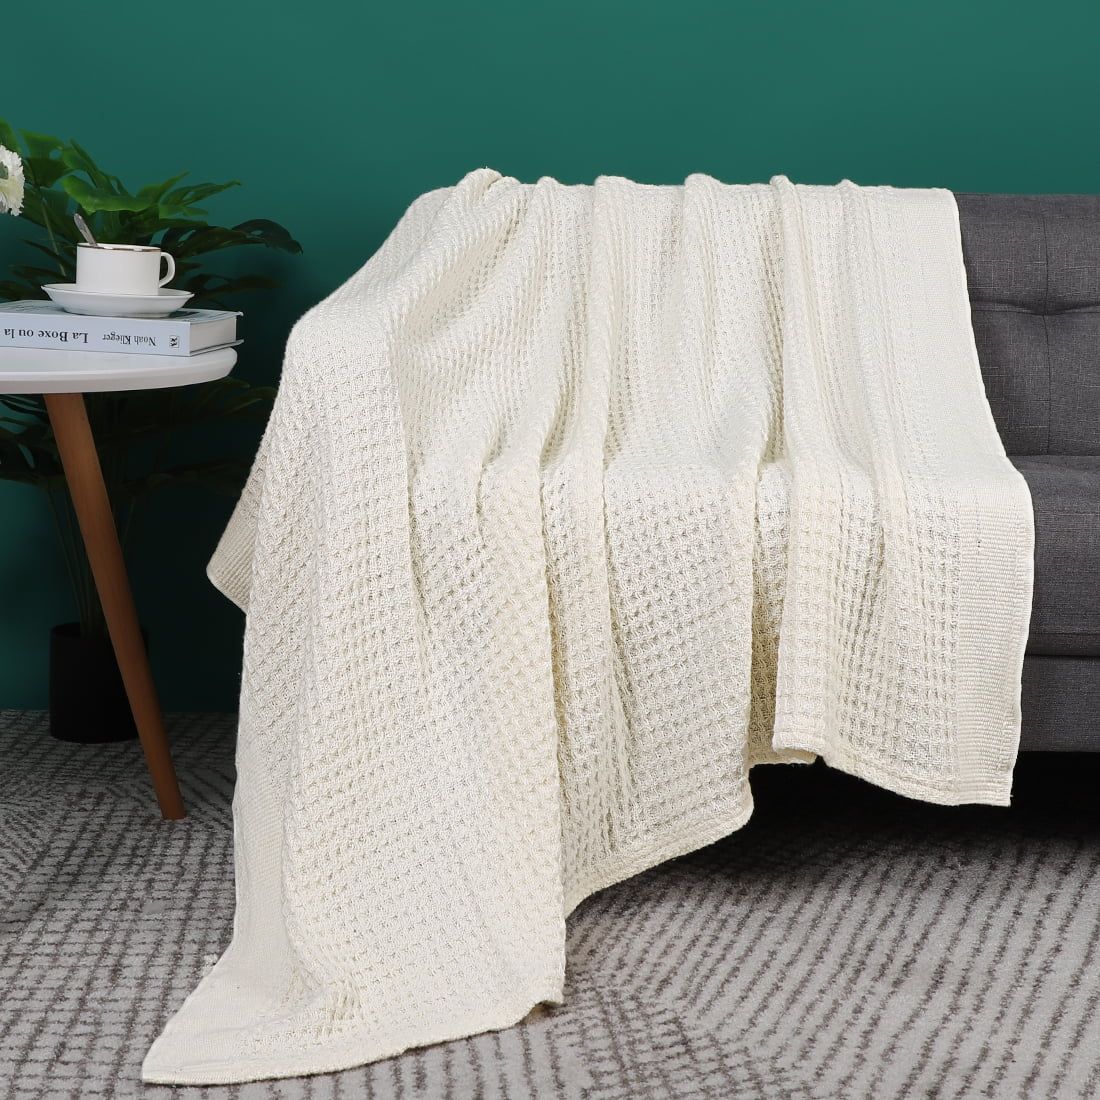 Piccocasa Soft 100% Cotton Thermal Blanket Throw Size Waffle Weave Knit Blanket for Sofa Couch,47... | Walmart (US)